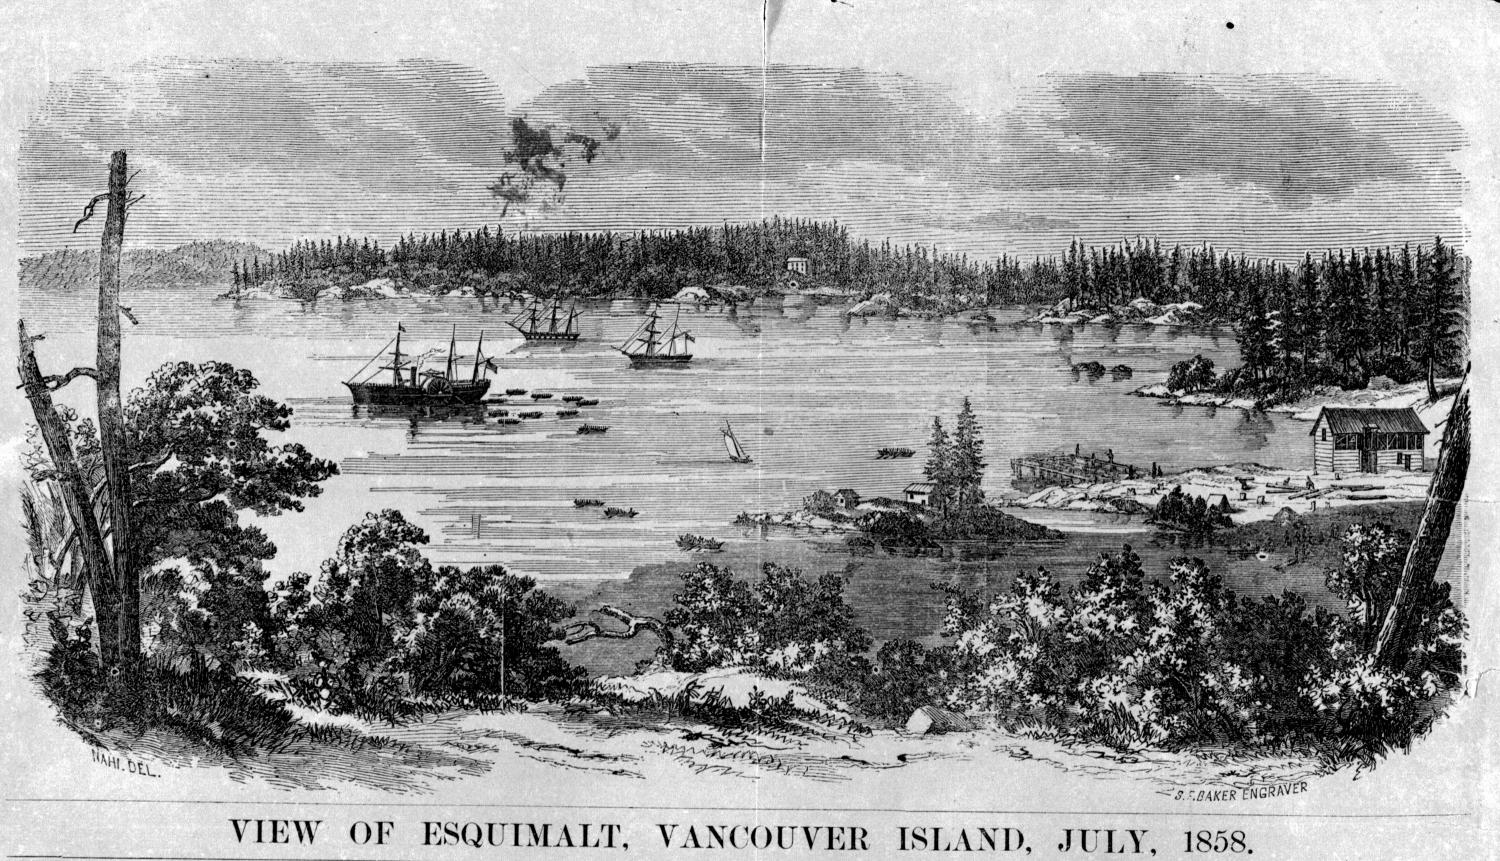 View of Esquimalt, Vancouver Island, July 1858; engraved from art by Charles Christian Nahl